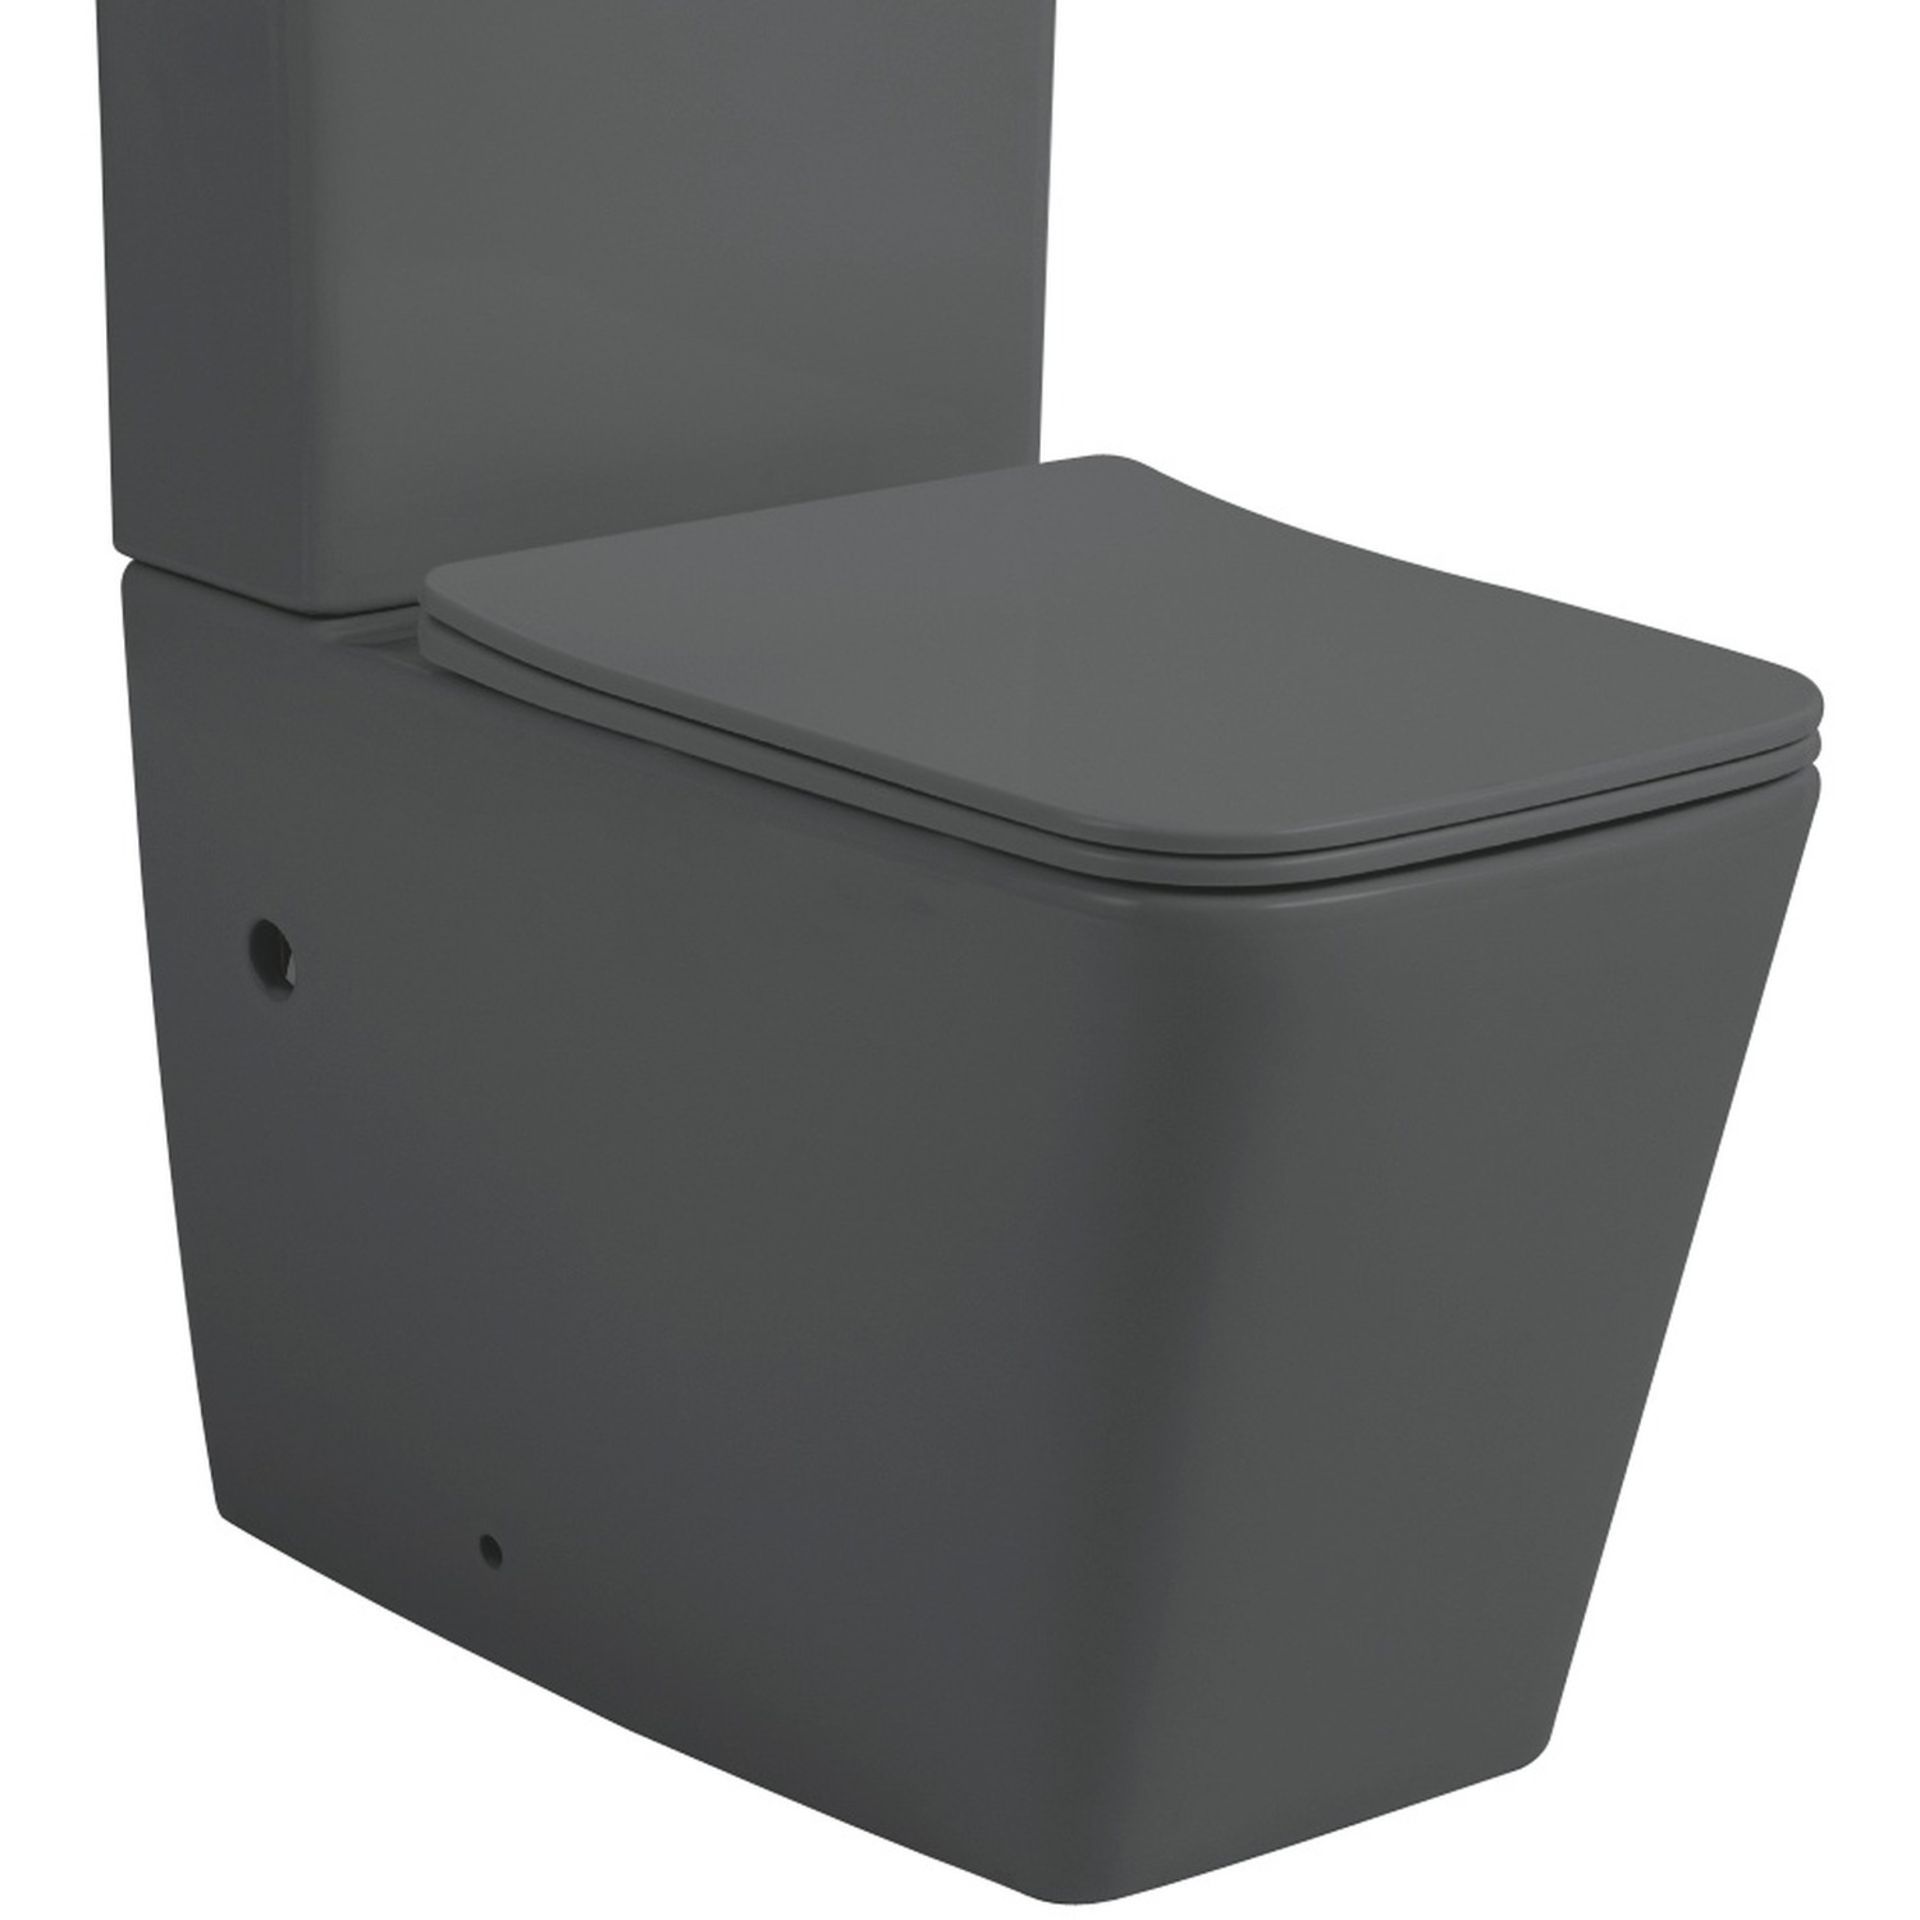 NEW & BOXED KARCENT Square Floor Standing Two Piece Toilet MATT GREY. This square floor standing 2- - Image 2 of 2